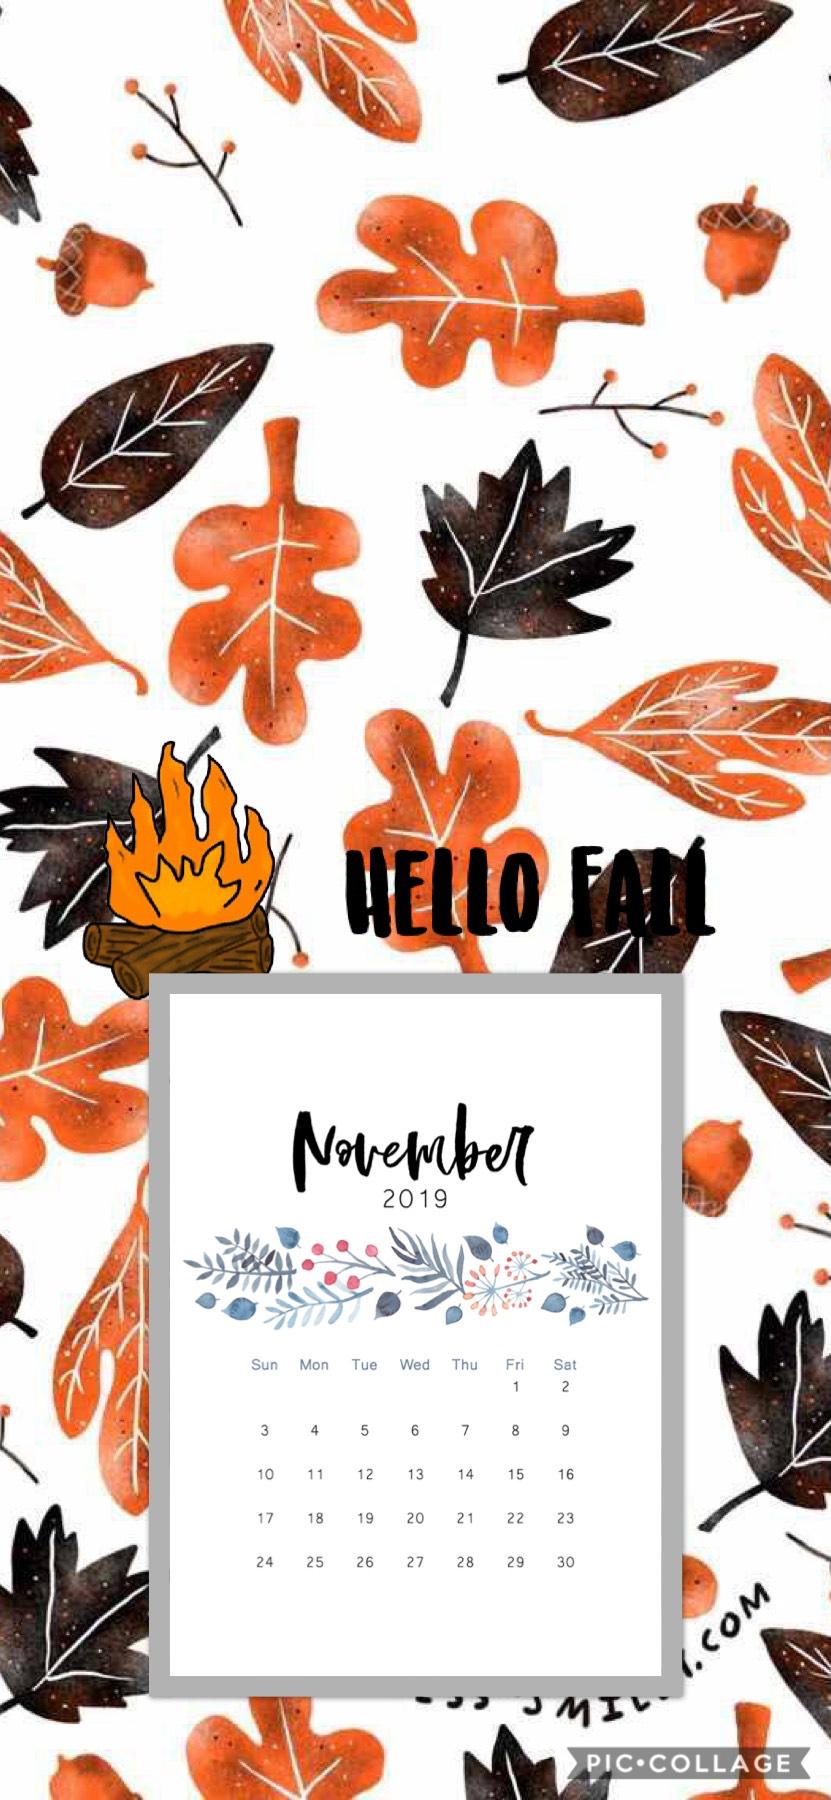 New fall background! 